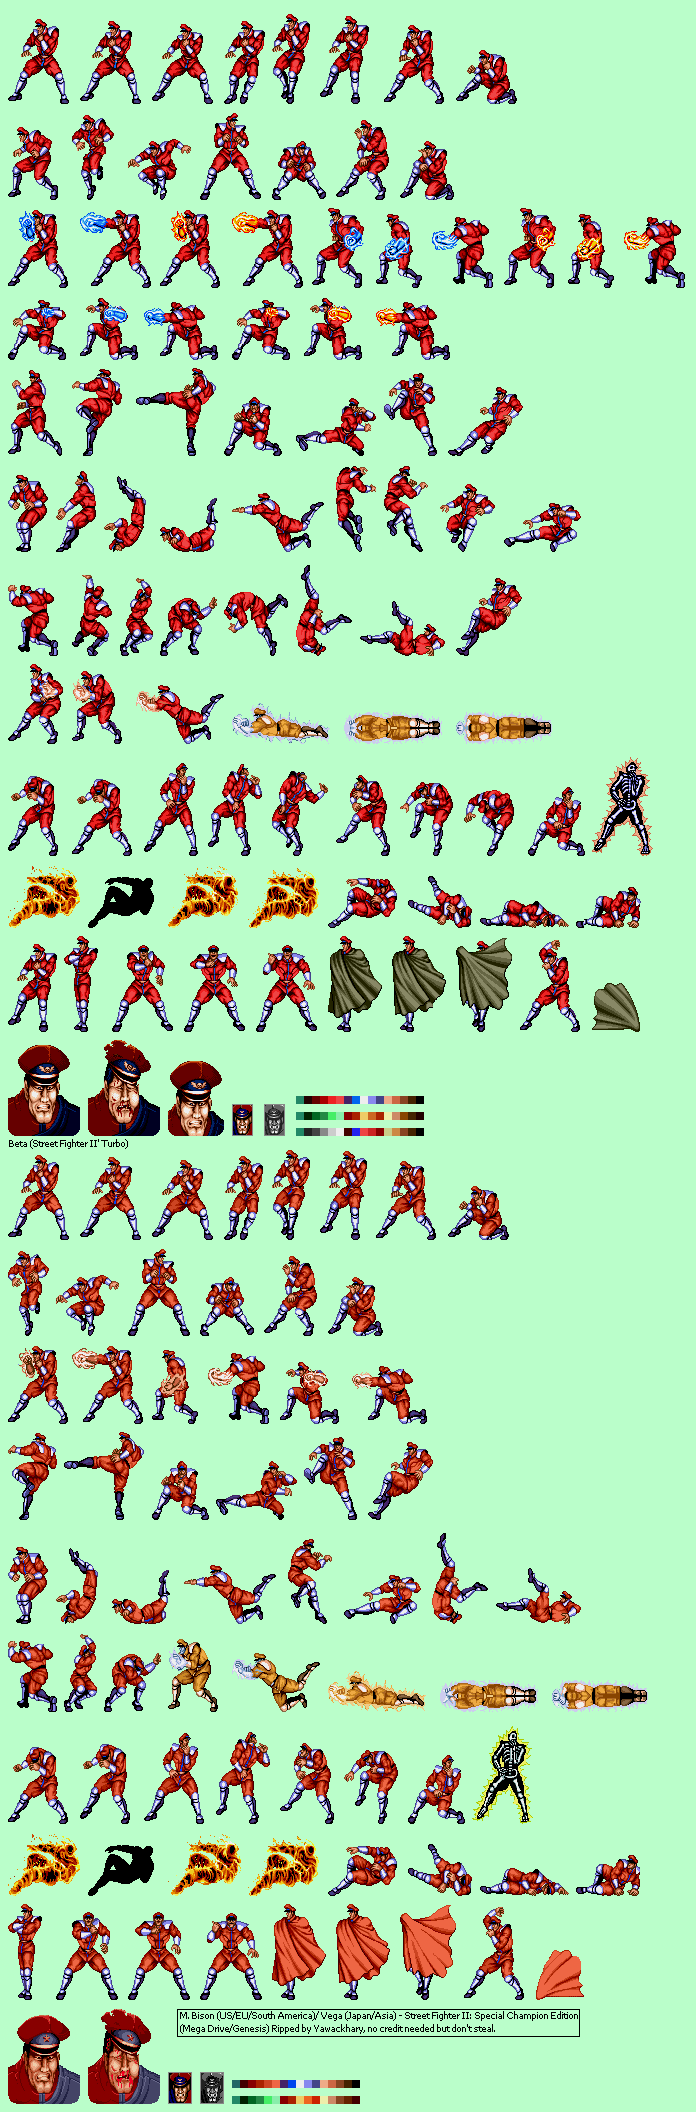 Street Fighter 2: Special Champion Edition - M. Bison